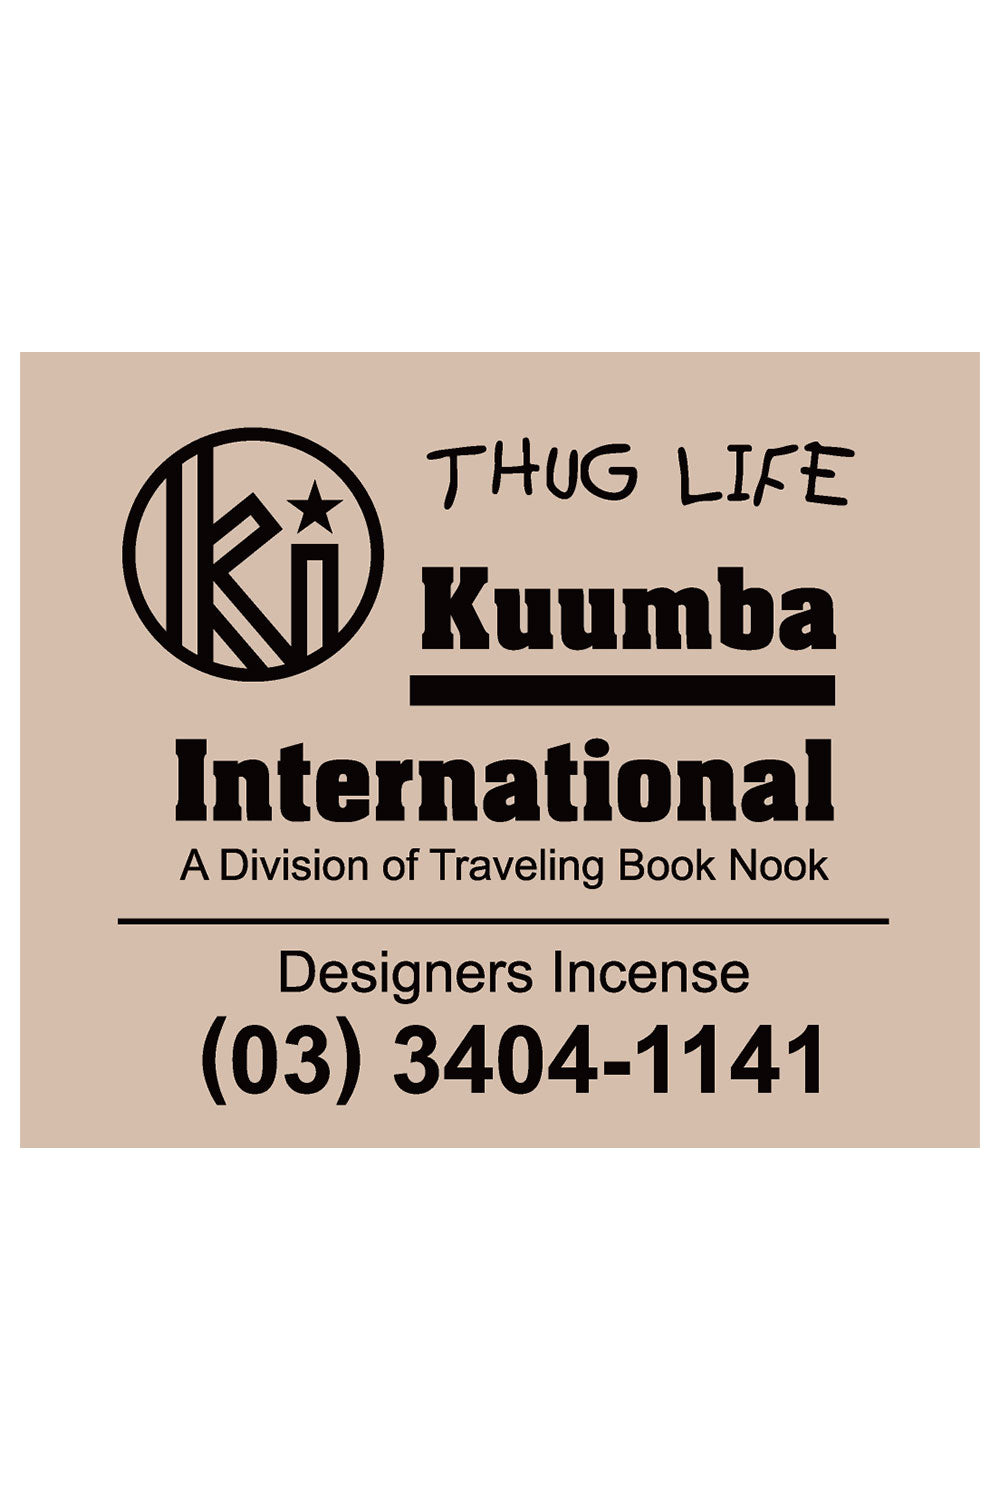 The KUUMBA - DESIGNERS INCENSE 30 PACK 1/2 SIZE THUG LIFE available online with global shipping, and in PAM Stores Melbourne and Sydney.